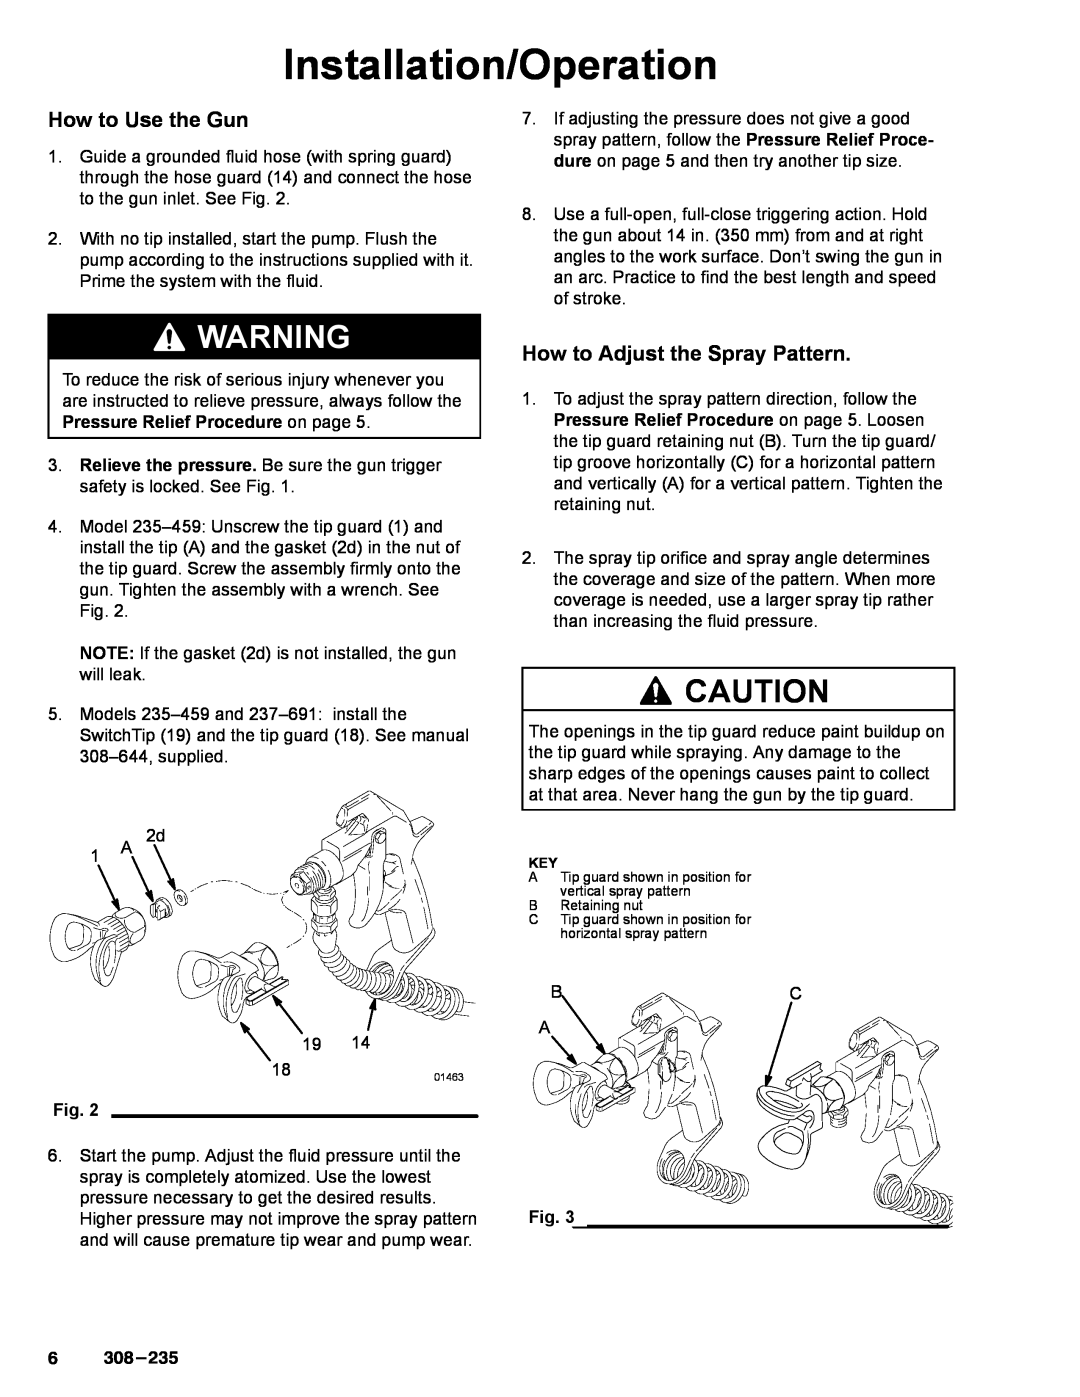 Graco Inc 308235, 237691, 235459 manual How to Use the Gun, How to Adjust the Spray Pattern, Installation/Operation 